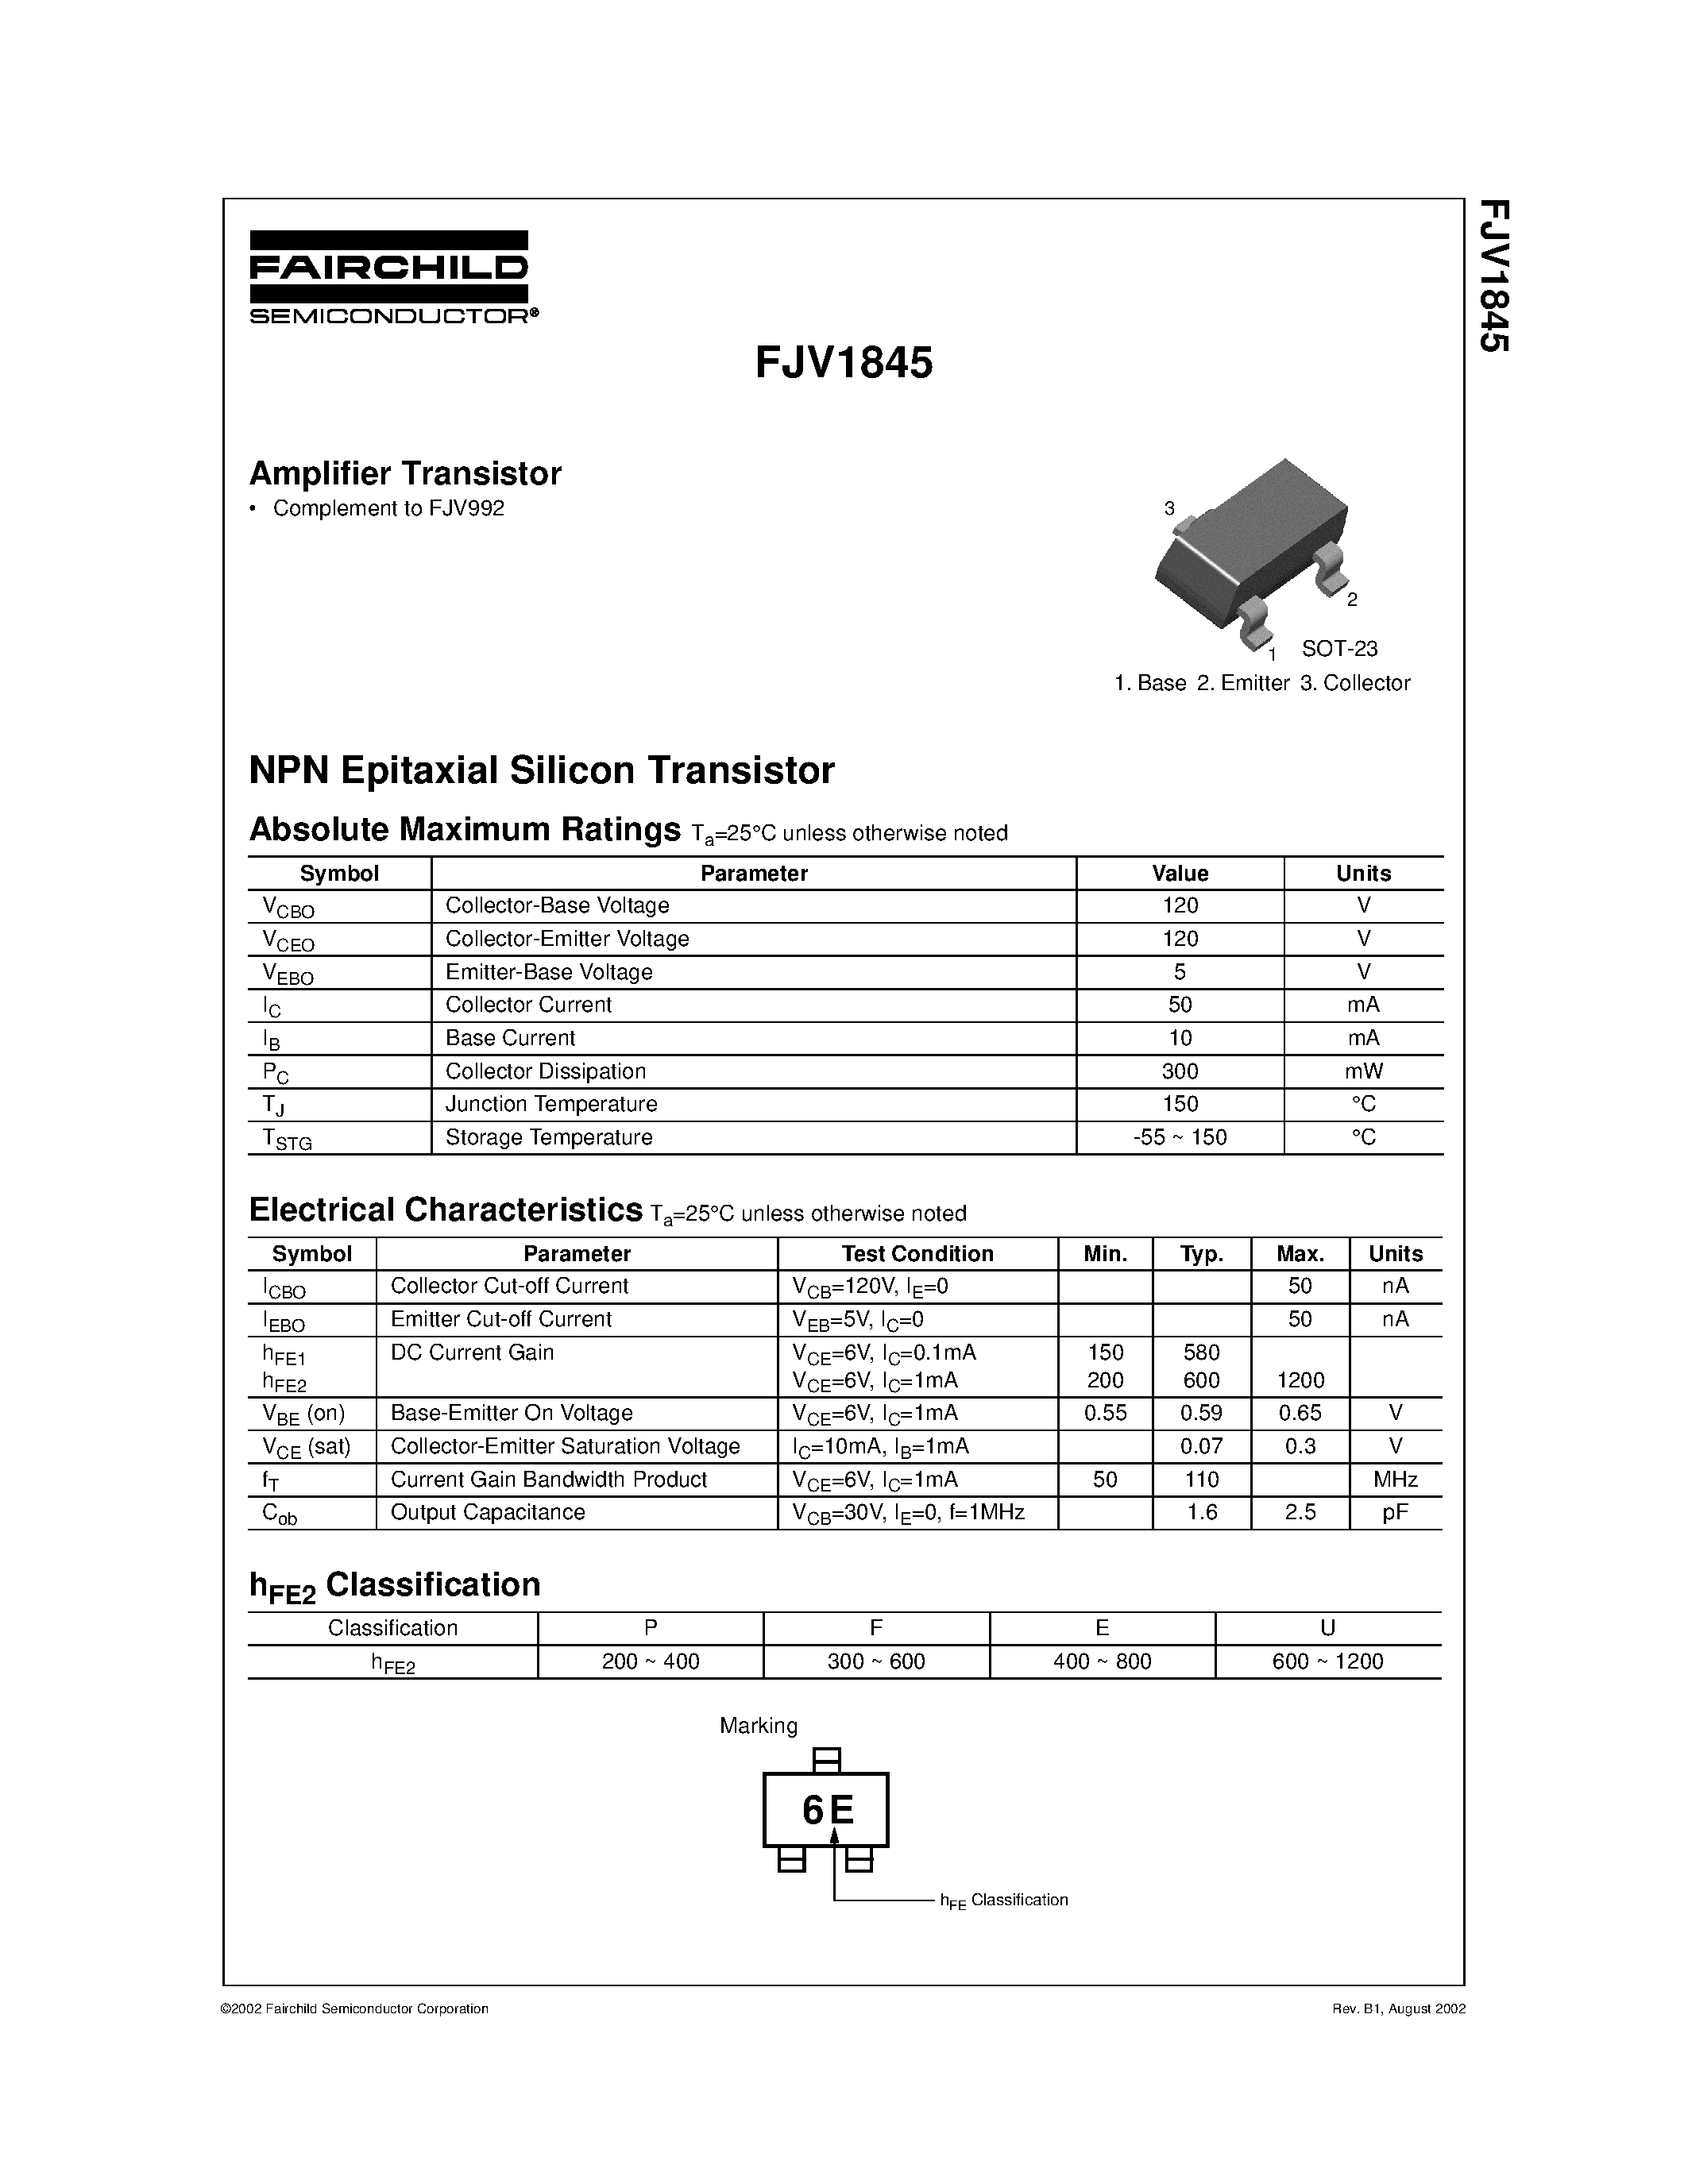 Даташит FJV1845-NPN Epitaxial Silicon Transistor страница 1